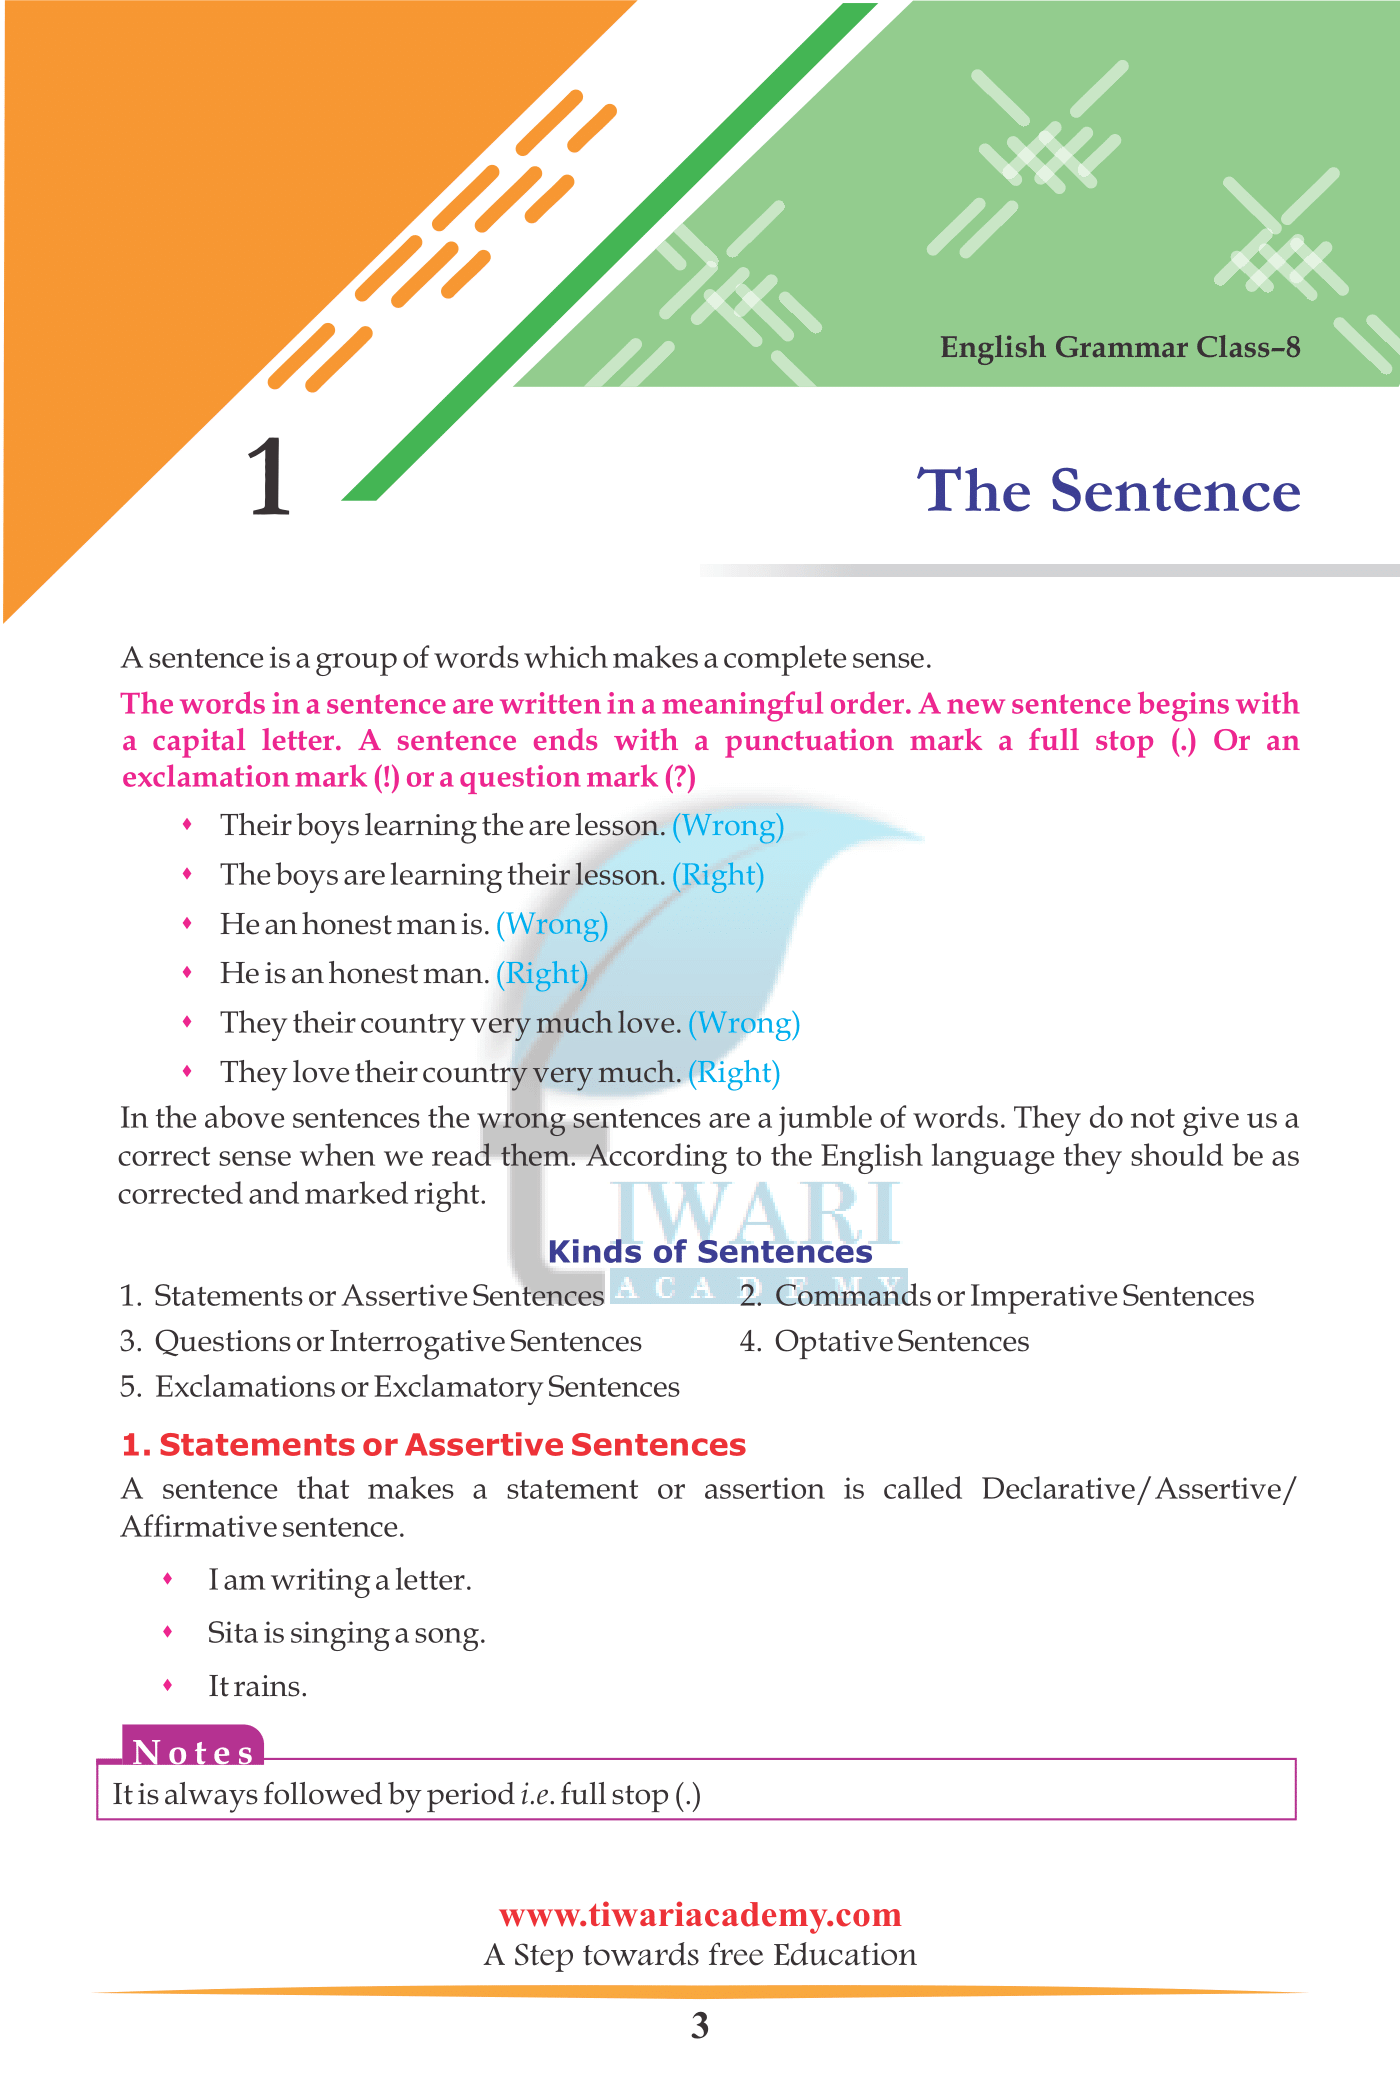 Class 8 English Grammar Chapter 1 The Sentence with examples